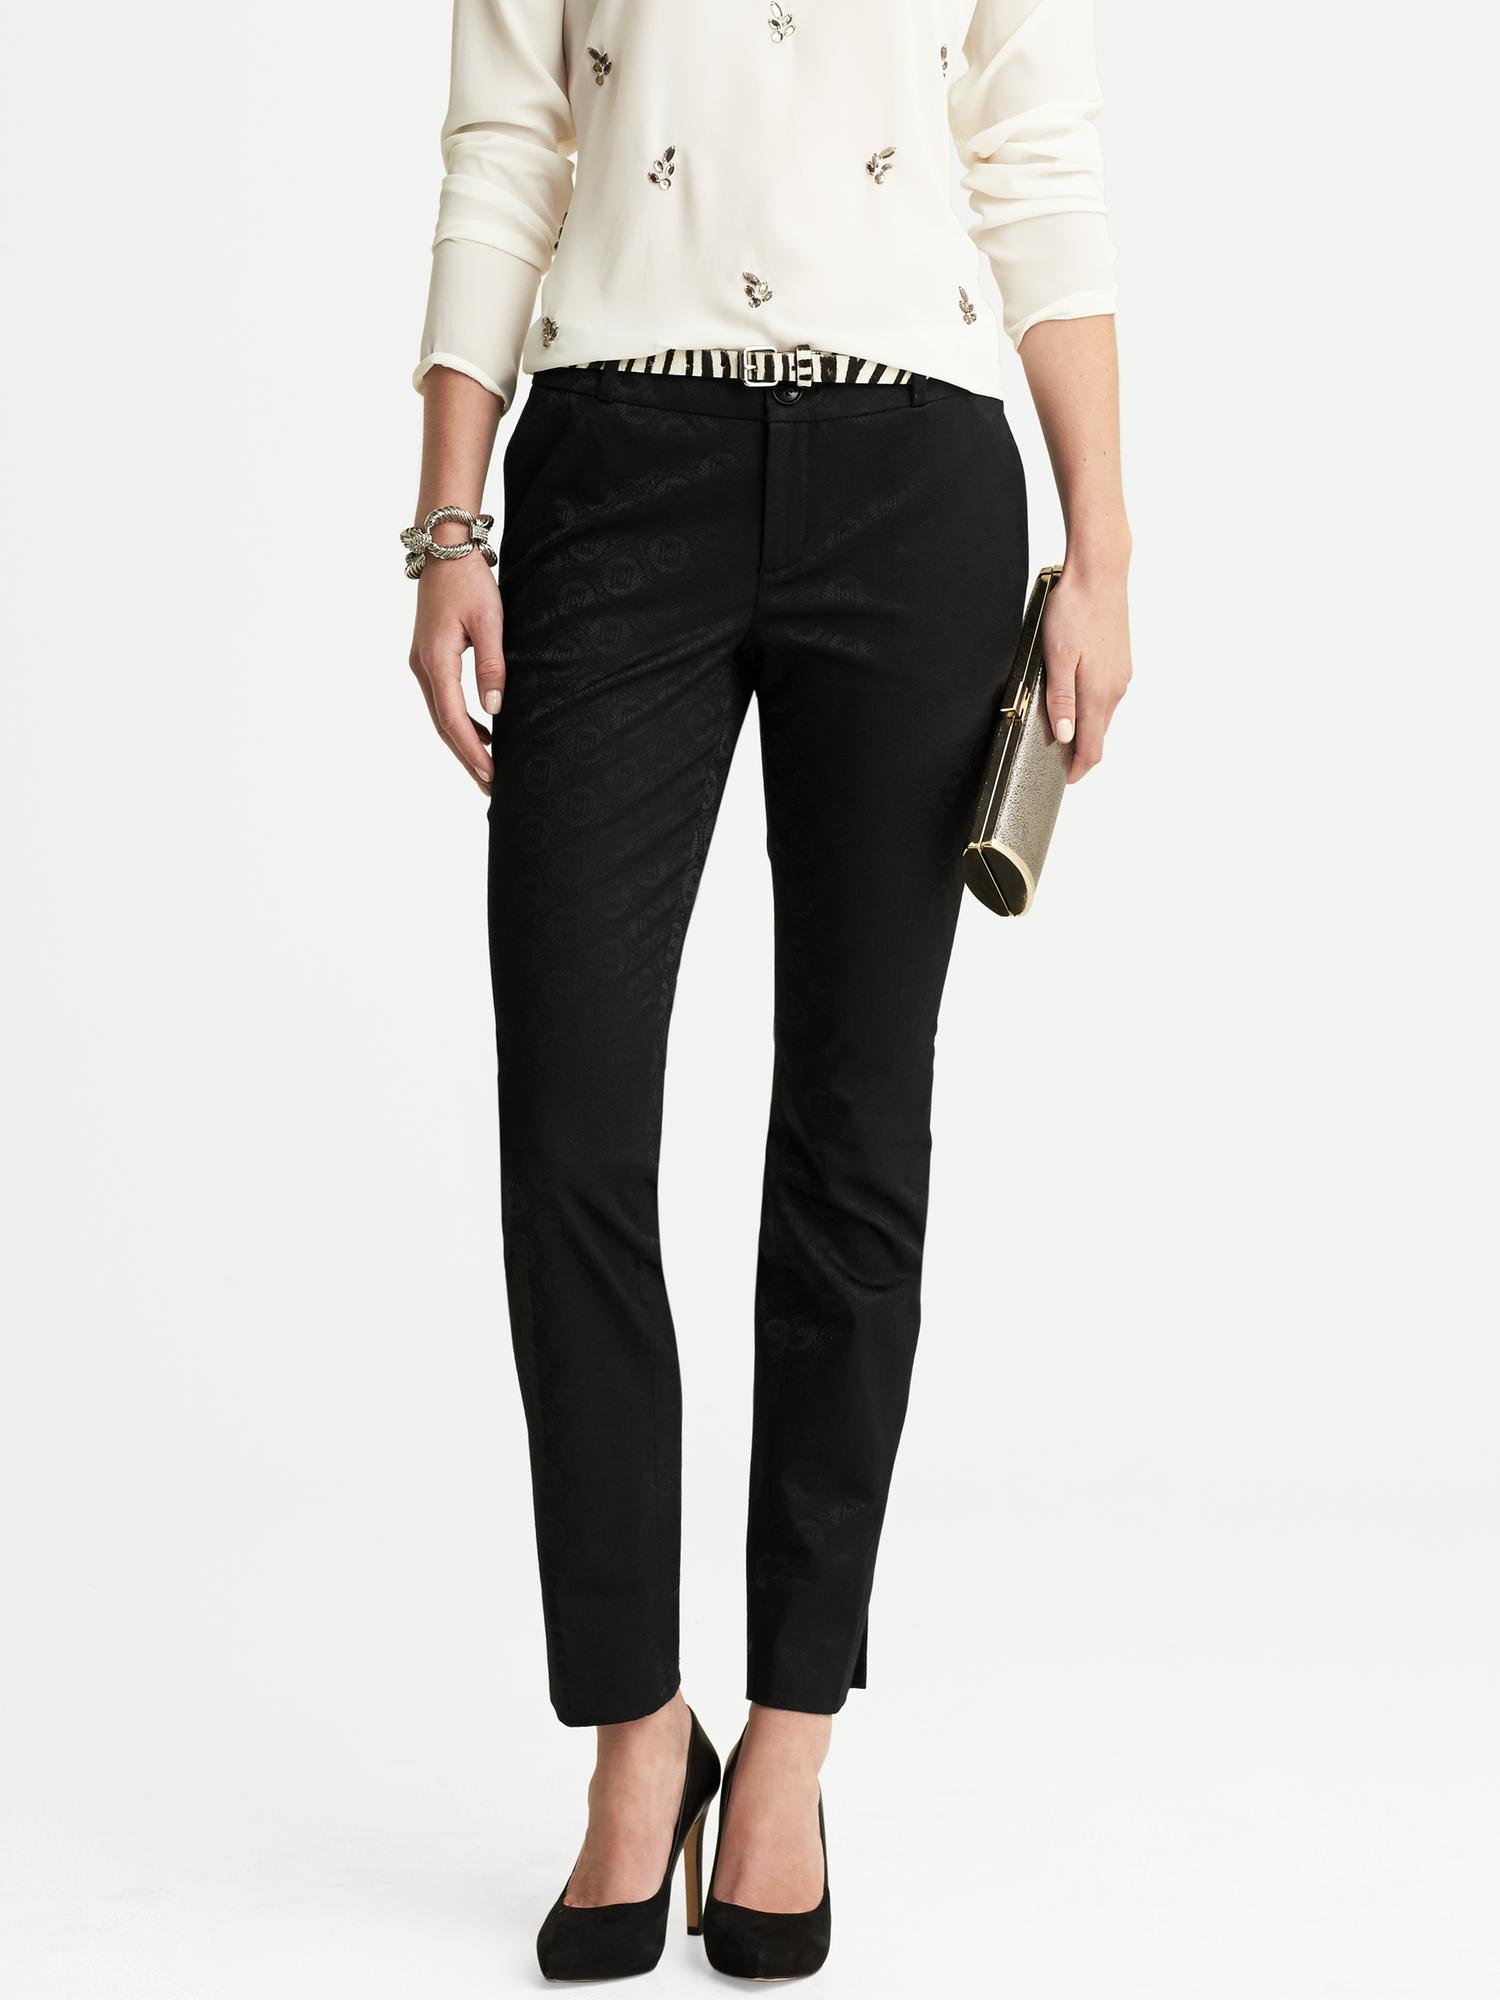 Camden-Fit Medallion Ankle Pant